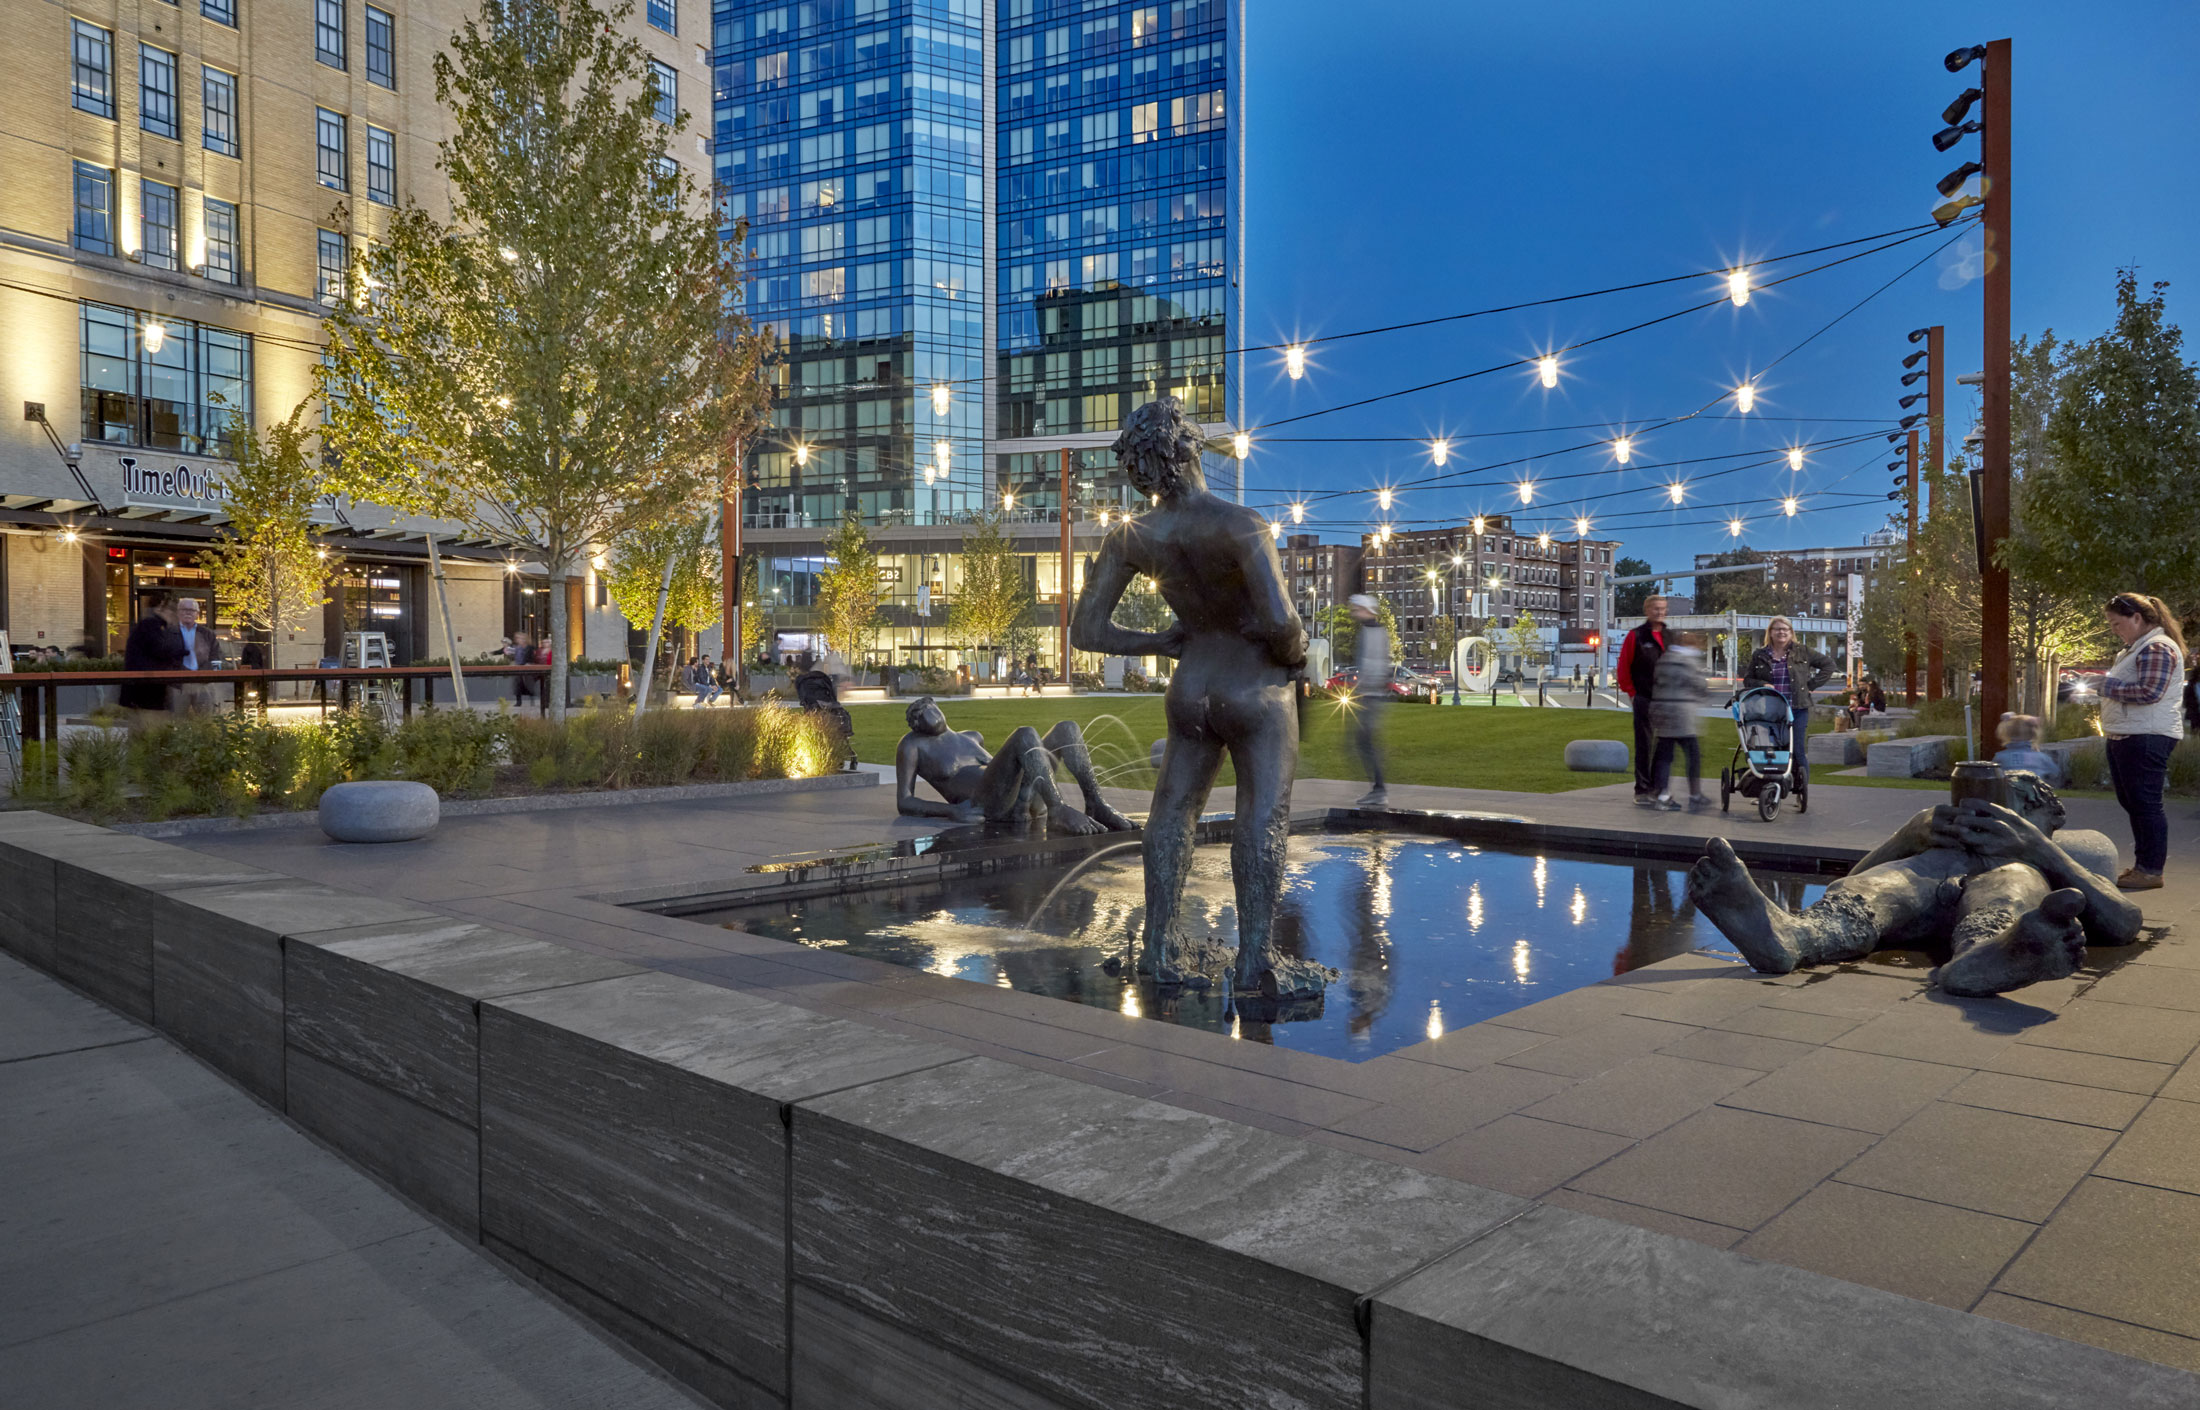 The project's one-acre community park—"The Green"—is a transformed parking lot. A green oasis that welcomes the public, artist Nicole Eisenman's playful outdoor sculpture, "Sketch for a Fountain," anchors a corner, while Time Out Market's outdoor terrace enlivens the building edge.